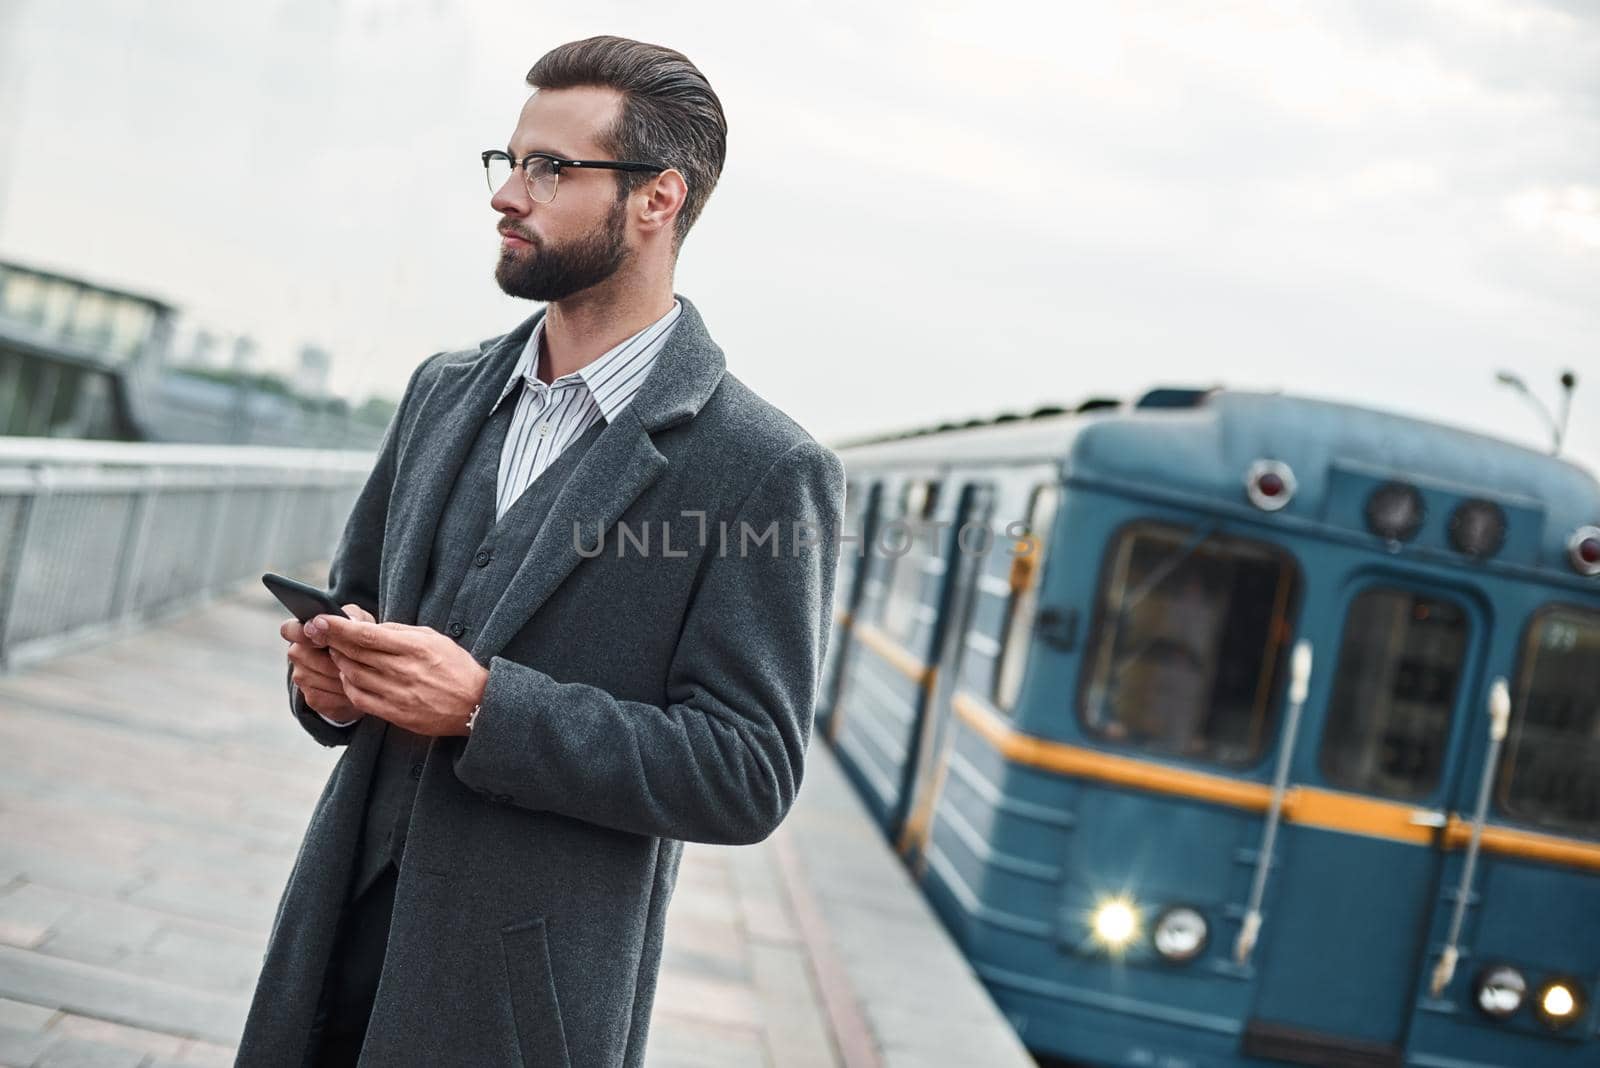 Business trip. Young businessman standing near railway holding smartphone looking aside pensive